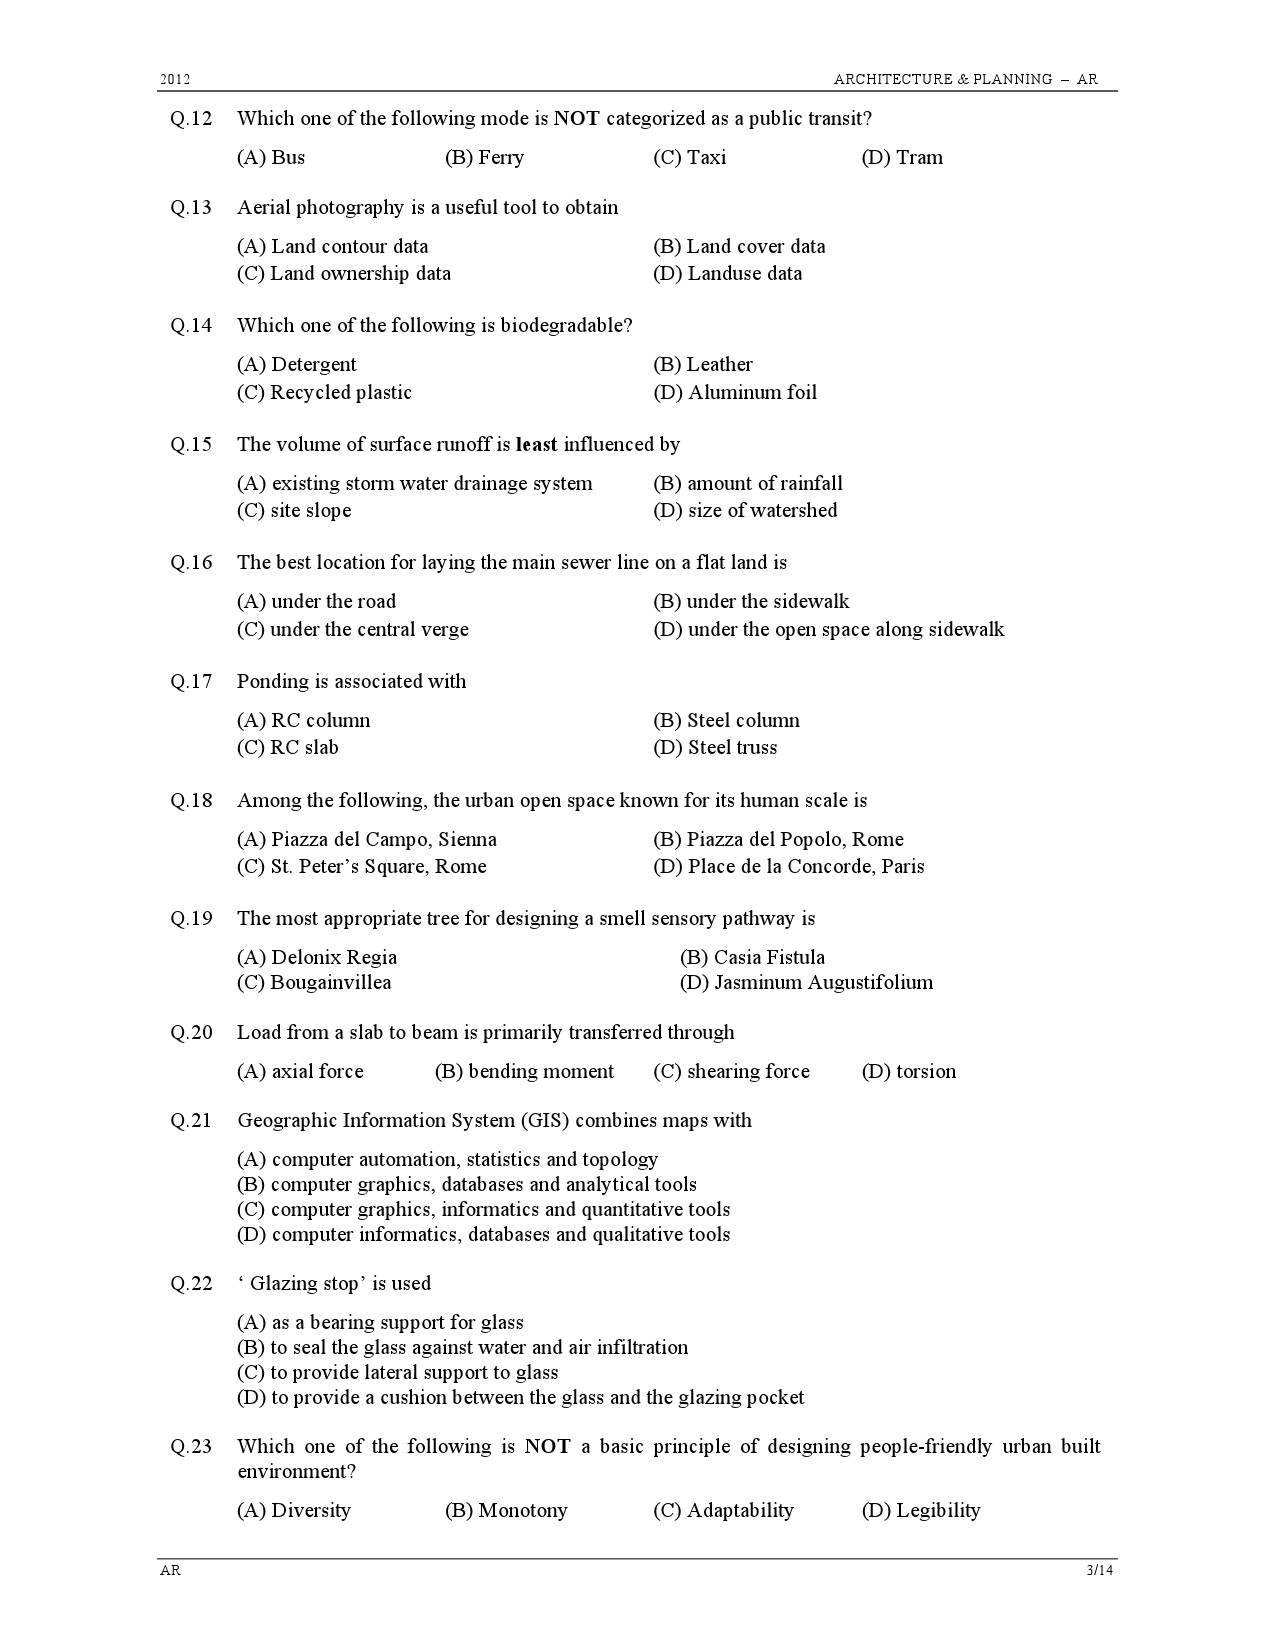 GATE Exam Question Paper 2012 Architecture and Planning 3